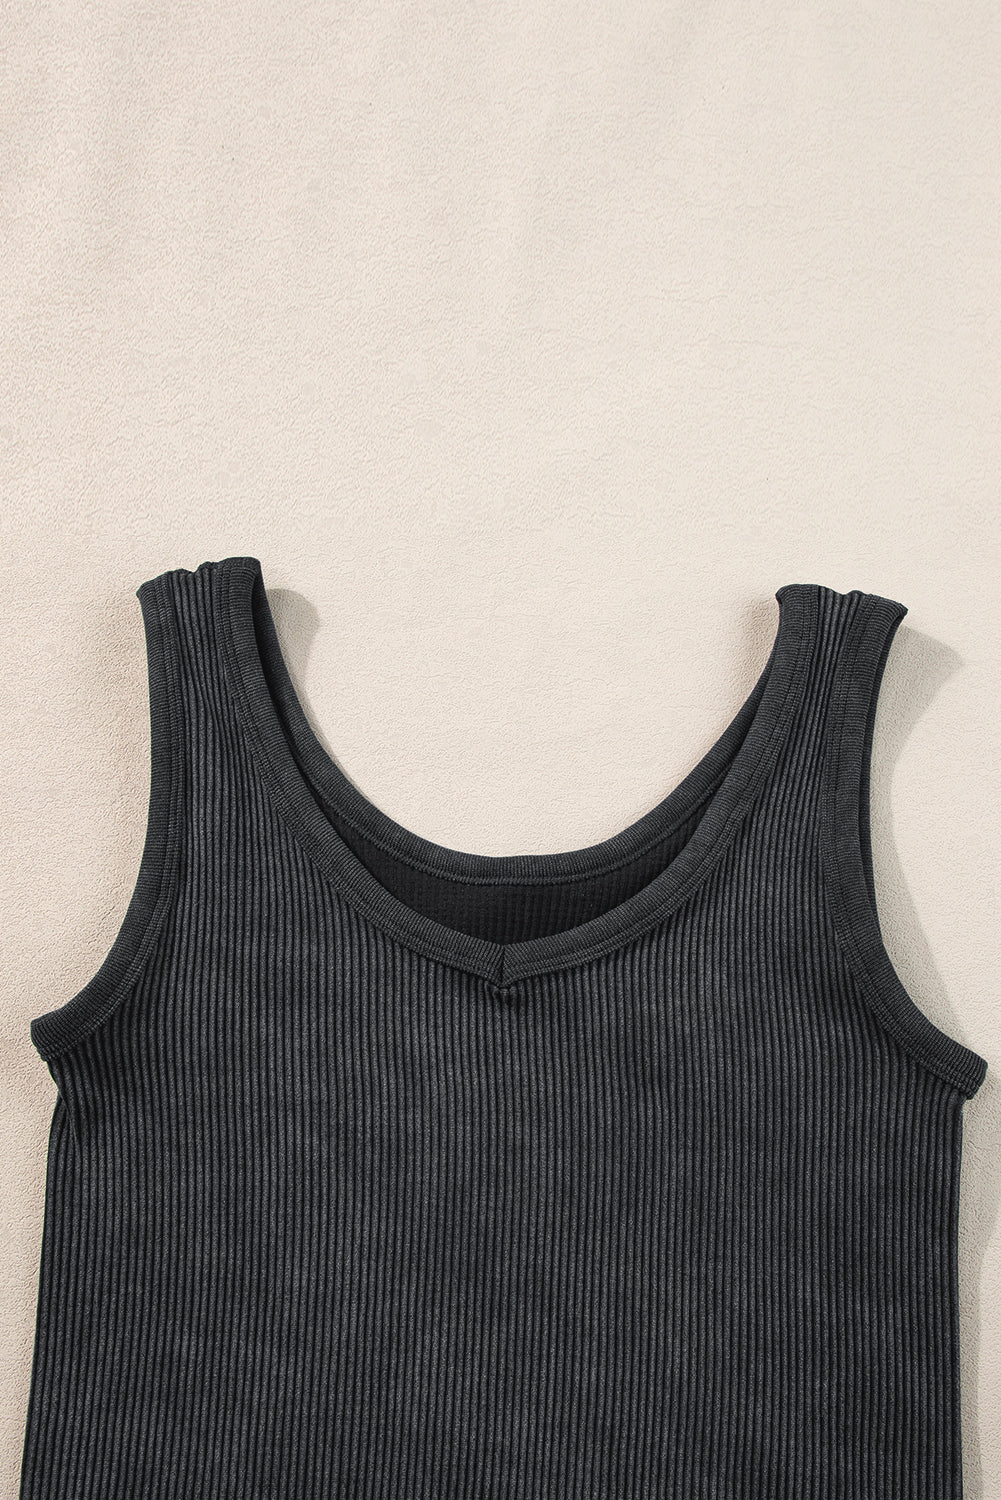 Black Ribbed Seamless Cropped Tank Top